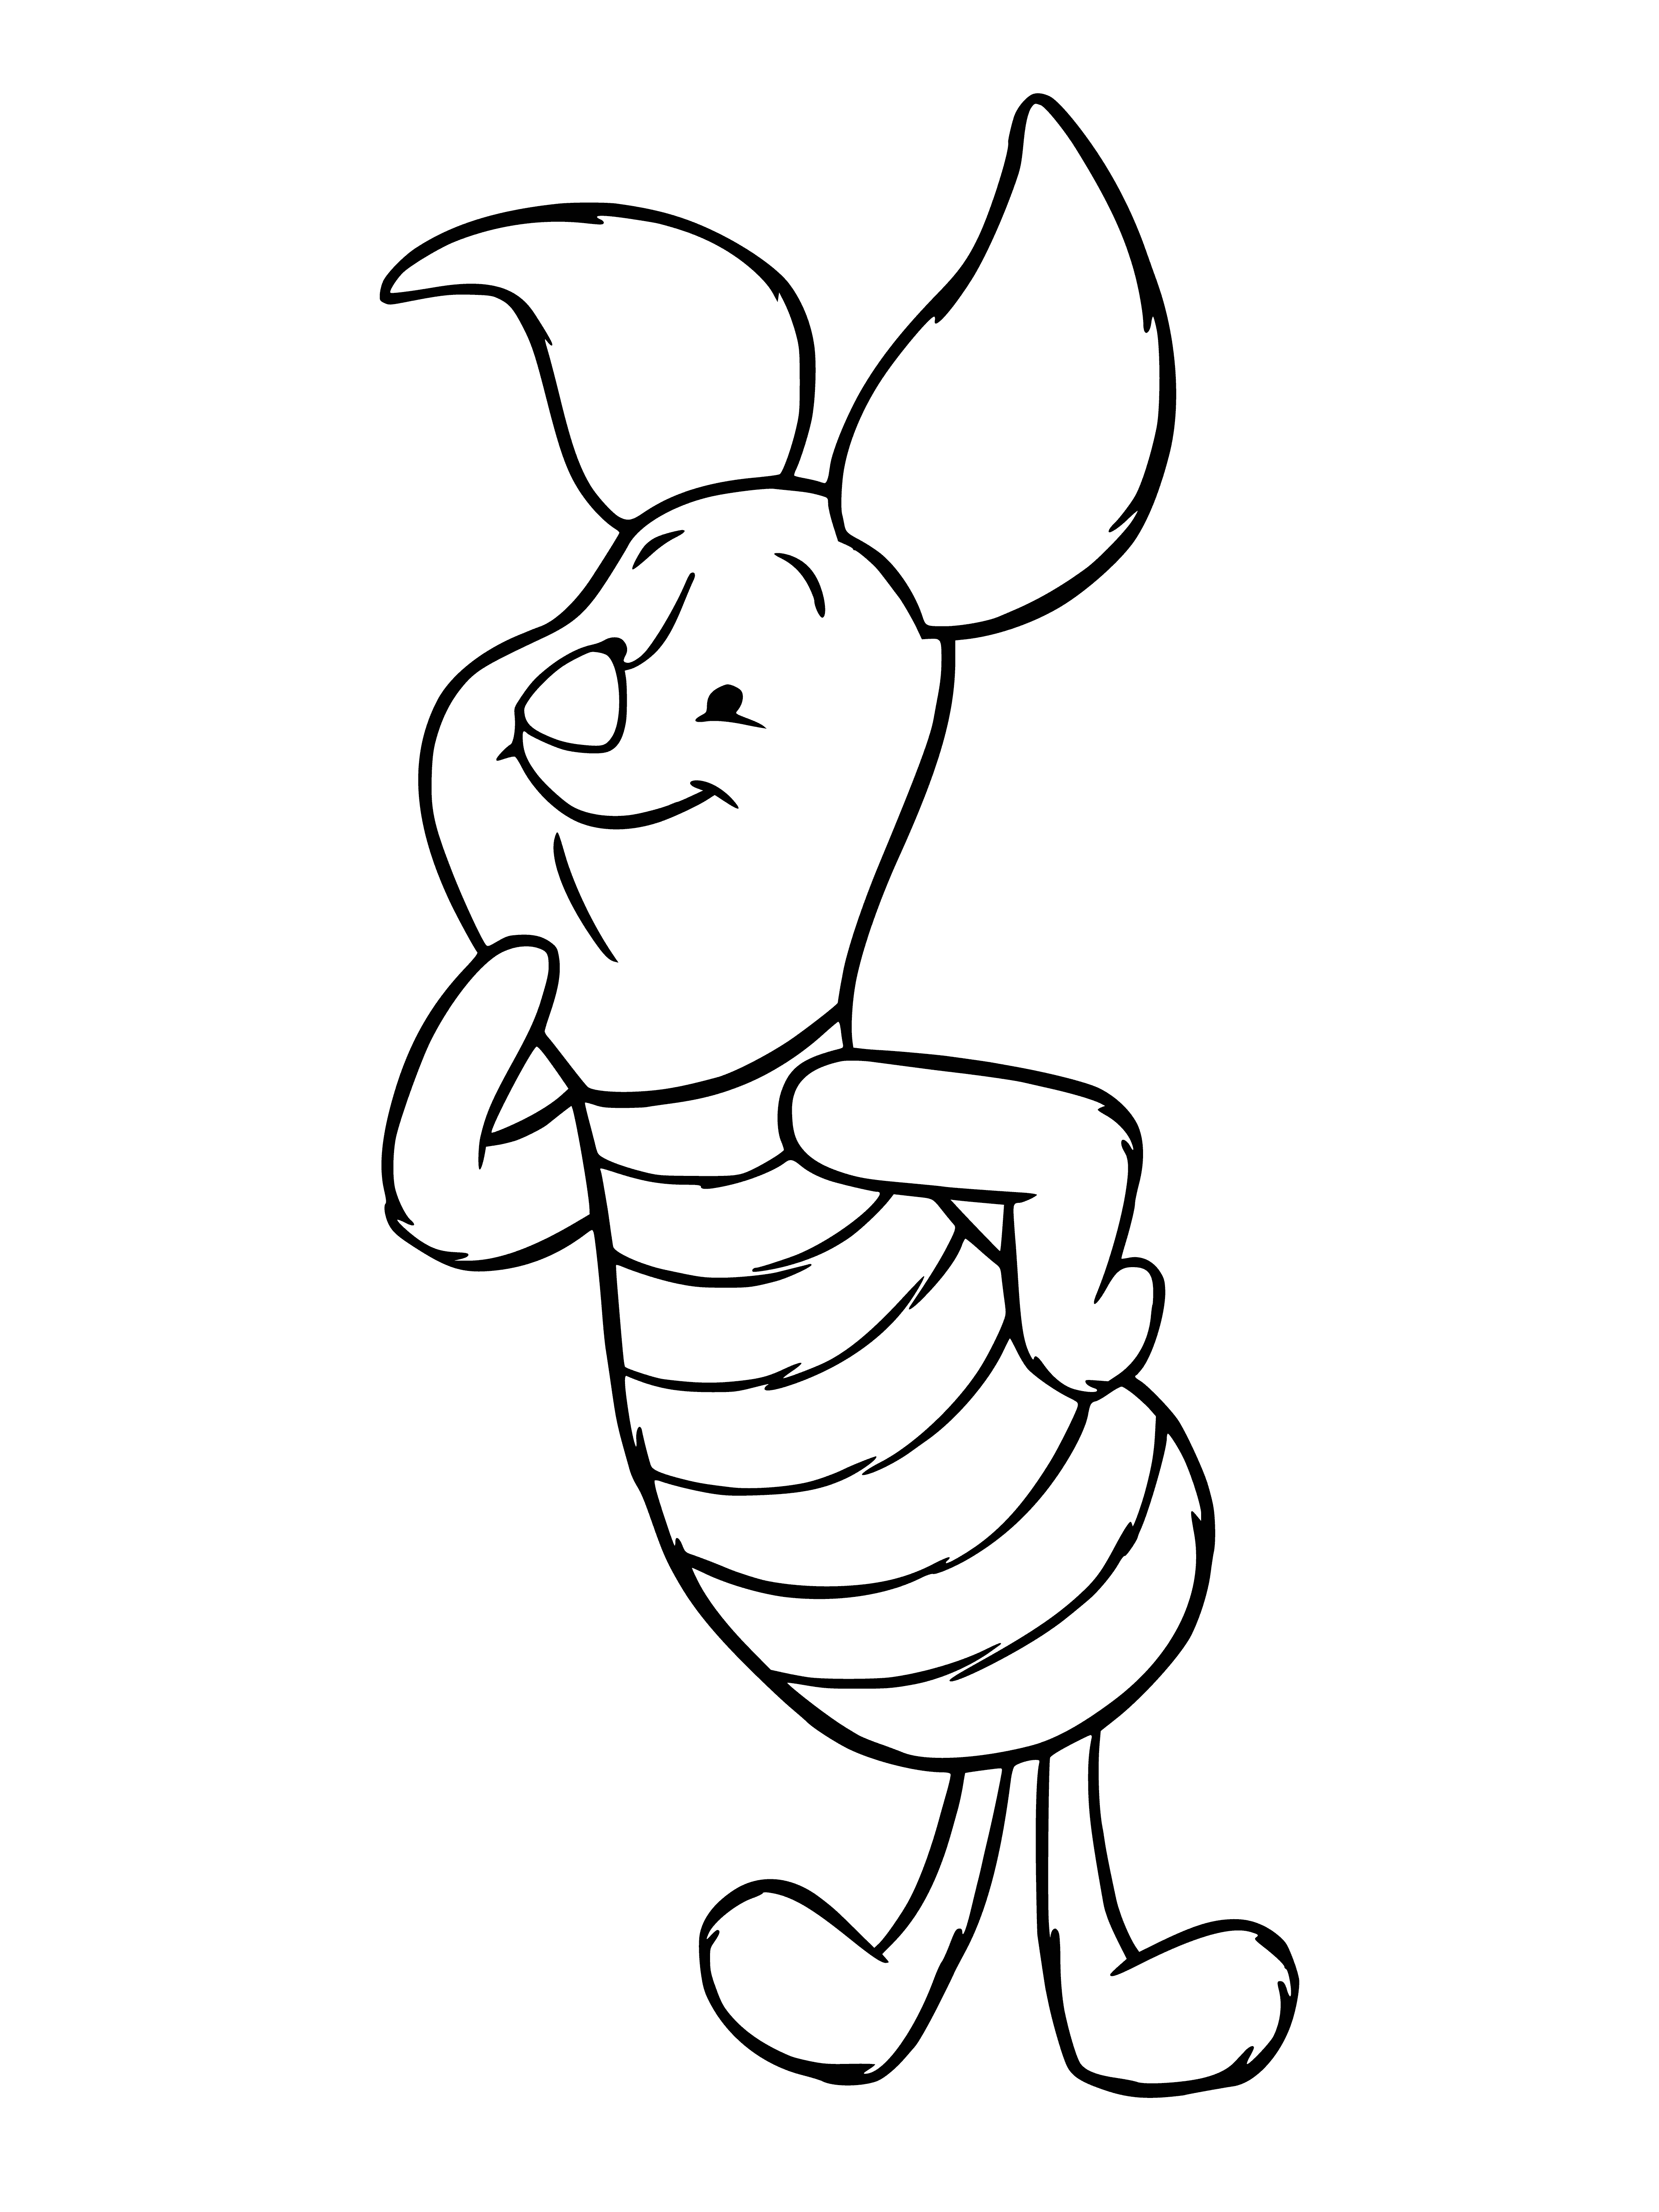 coloring page: Winnie the Pooh stands perplexed before a pile of dung, arms crossed.